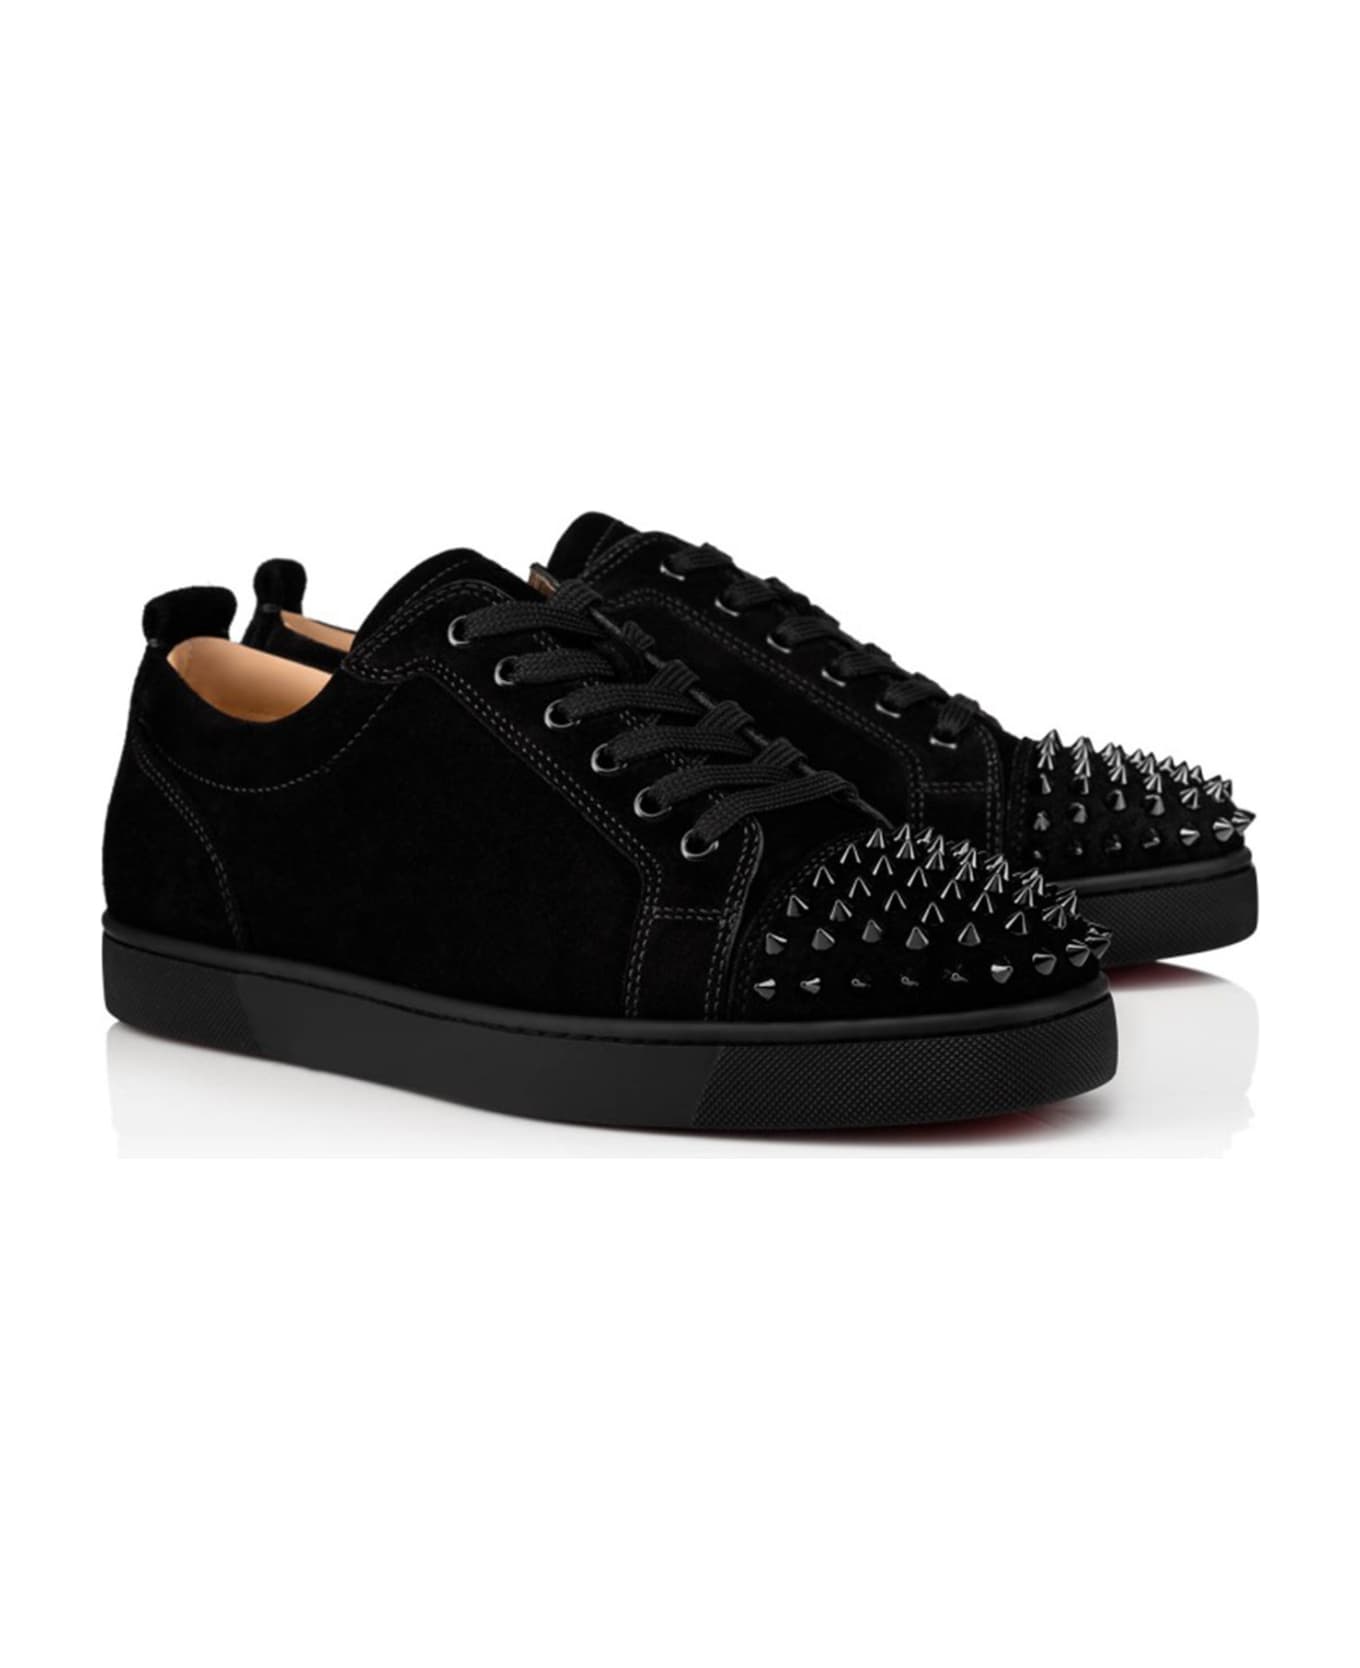 Christian Louboutin Louis Sneakers With Spikes - BLACK BLACK